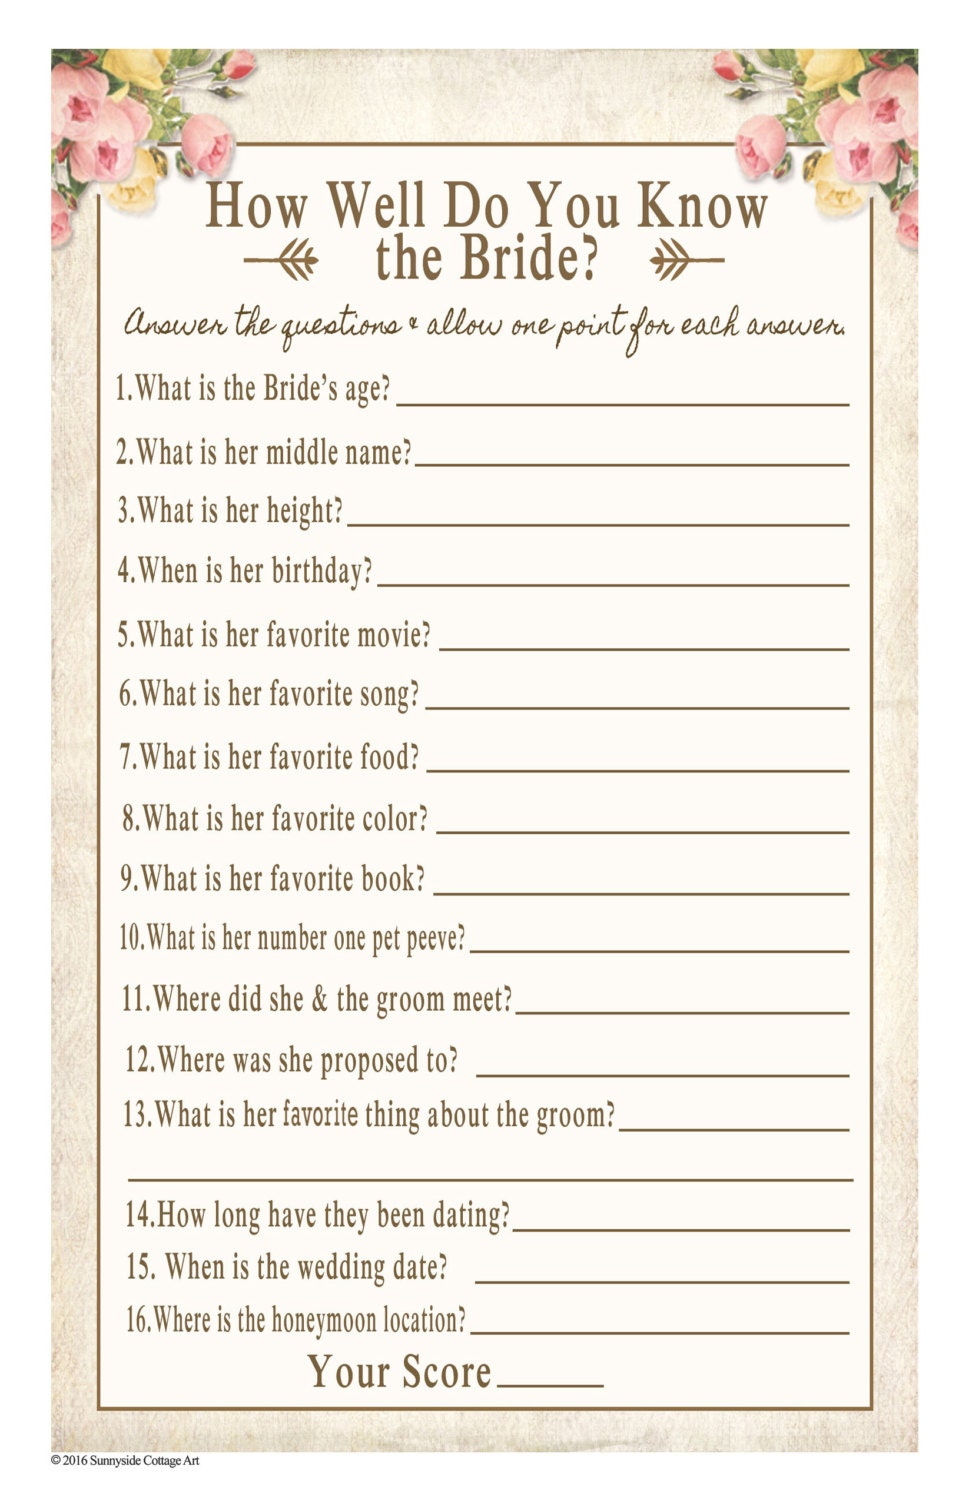 How Well do You Know the BRIDE game diy PRINTABLE Bridal